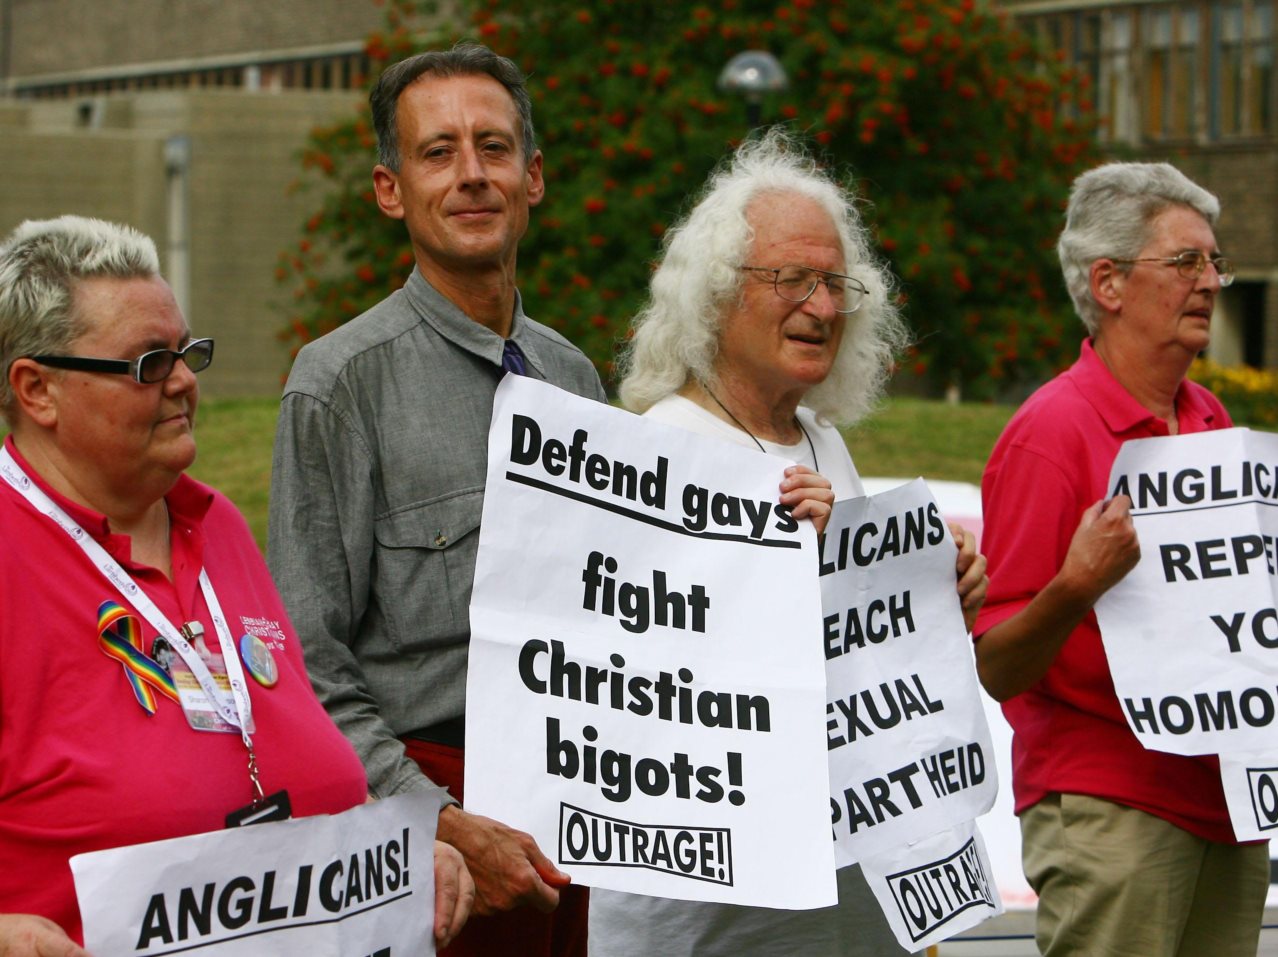 From Homophobia to Anti-Bigotry: How Did Christians Become the New Pariahs?